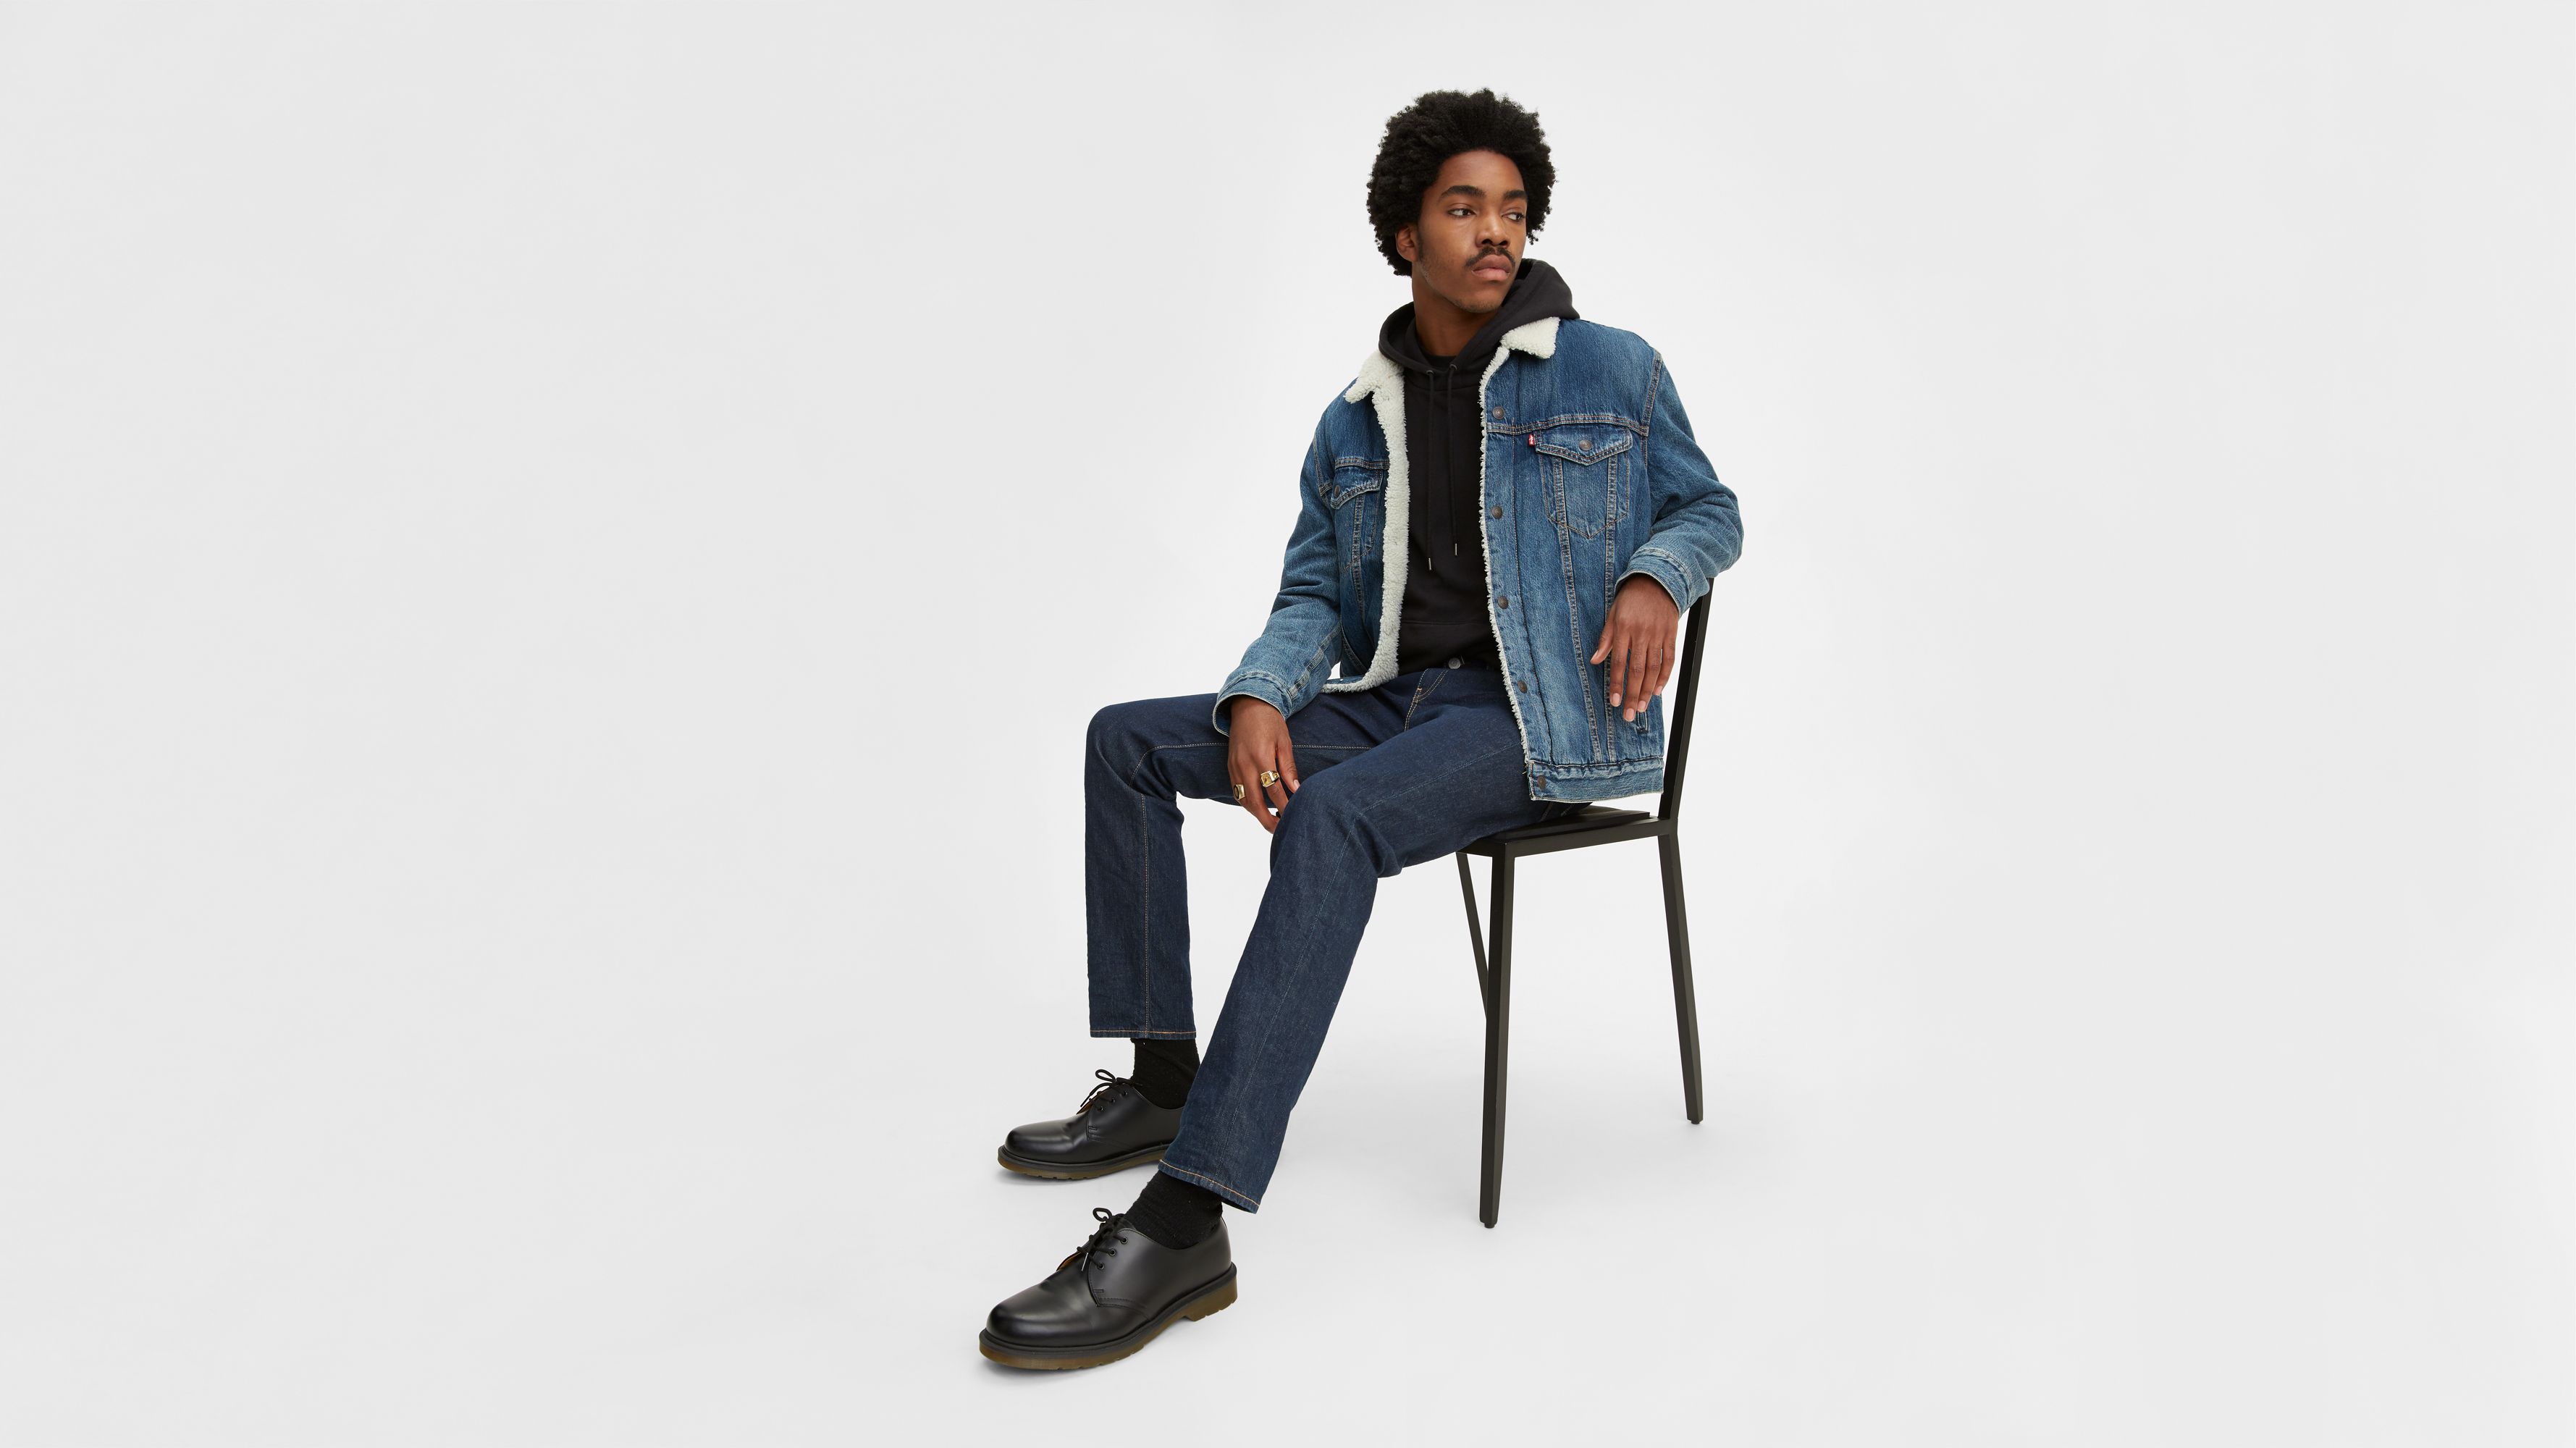 levis 511 jeans canada